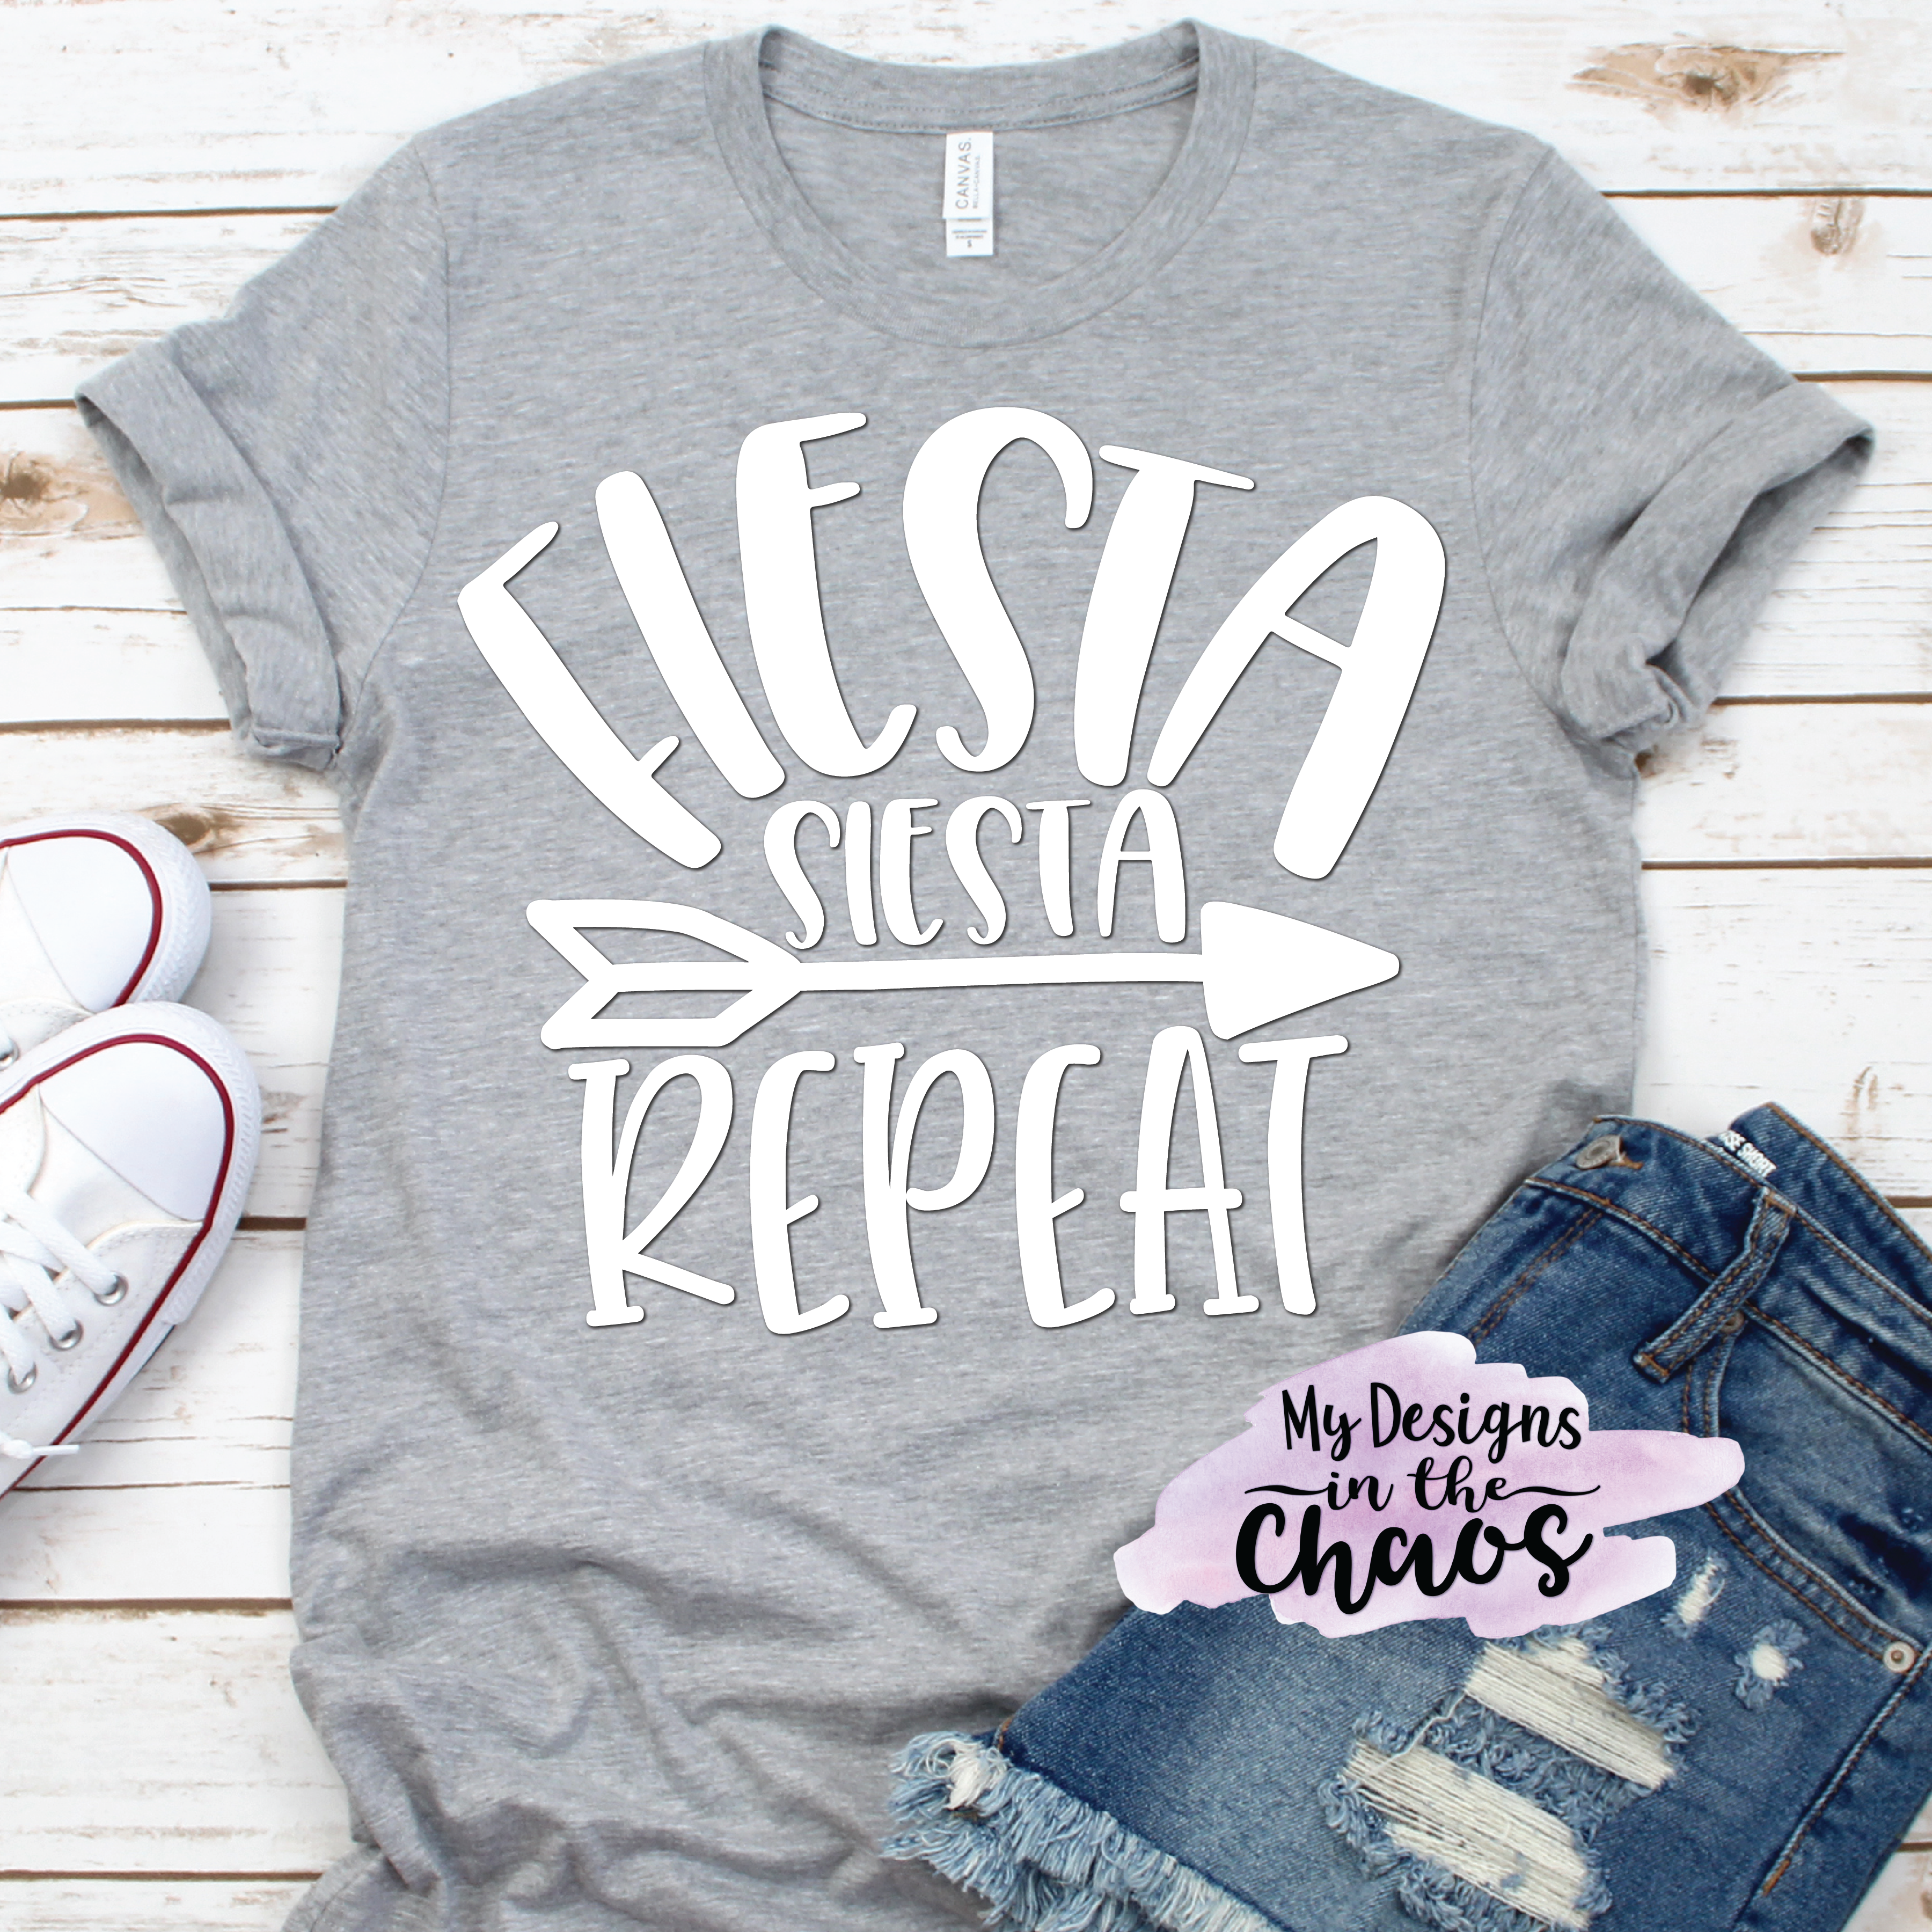 Download Fiesta Siesta Repeat - My Designs In the Chaos